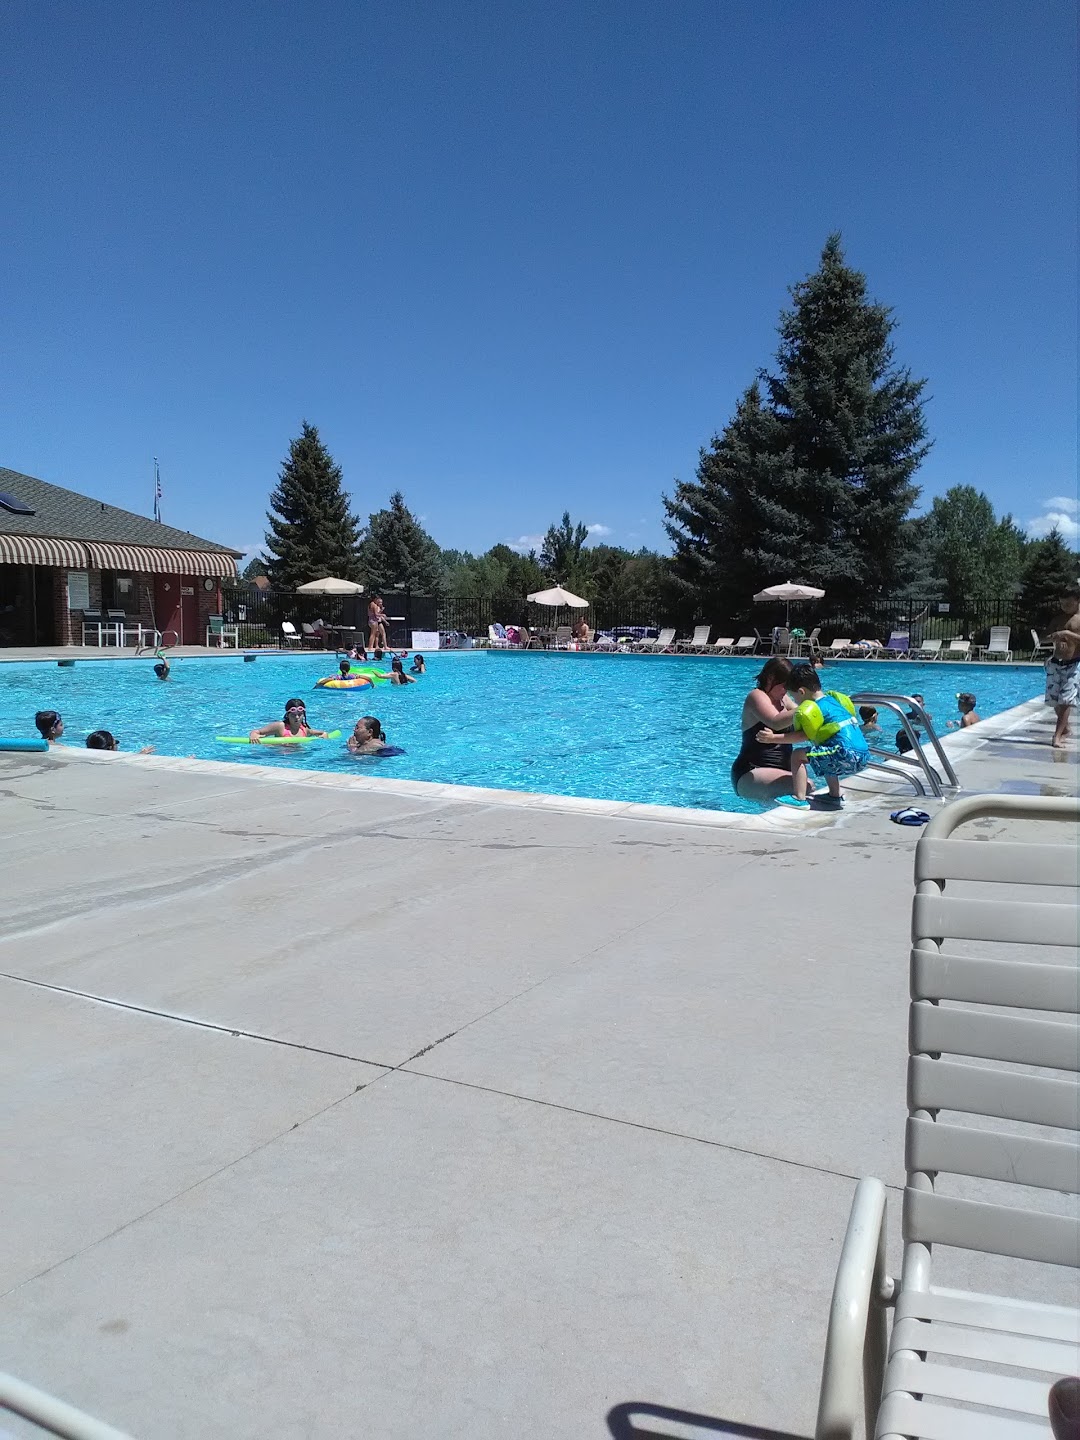 Park View Community Pool and Park